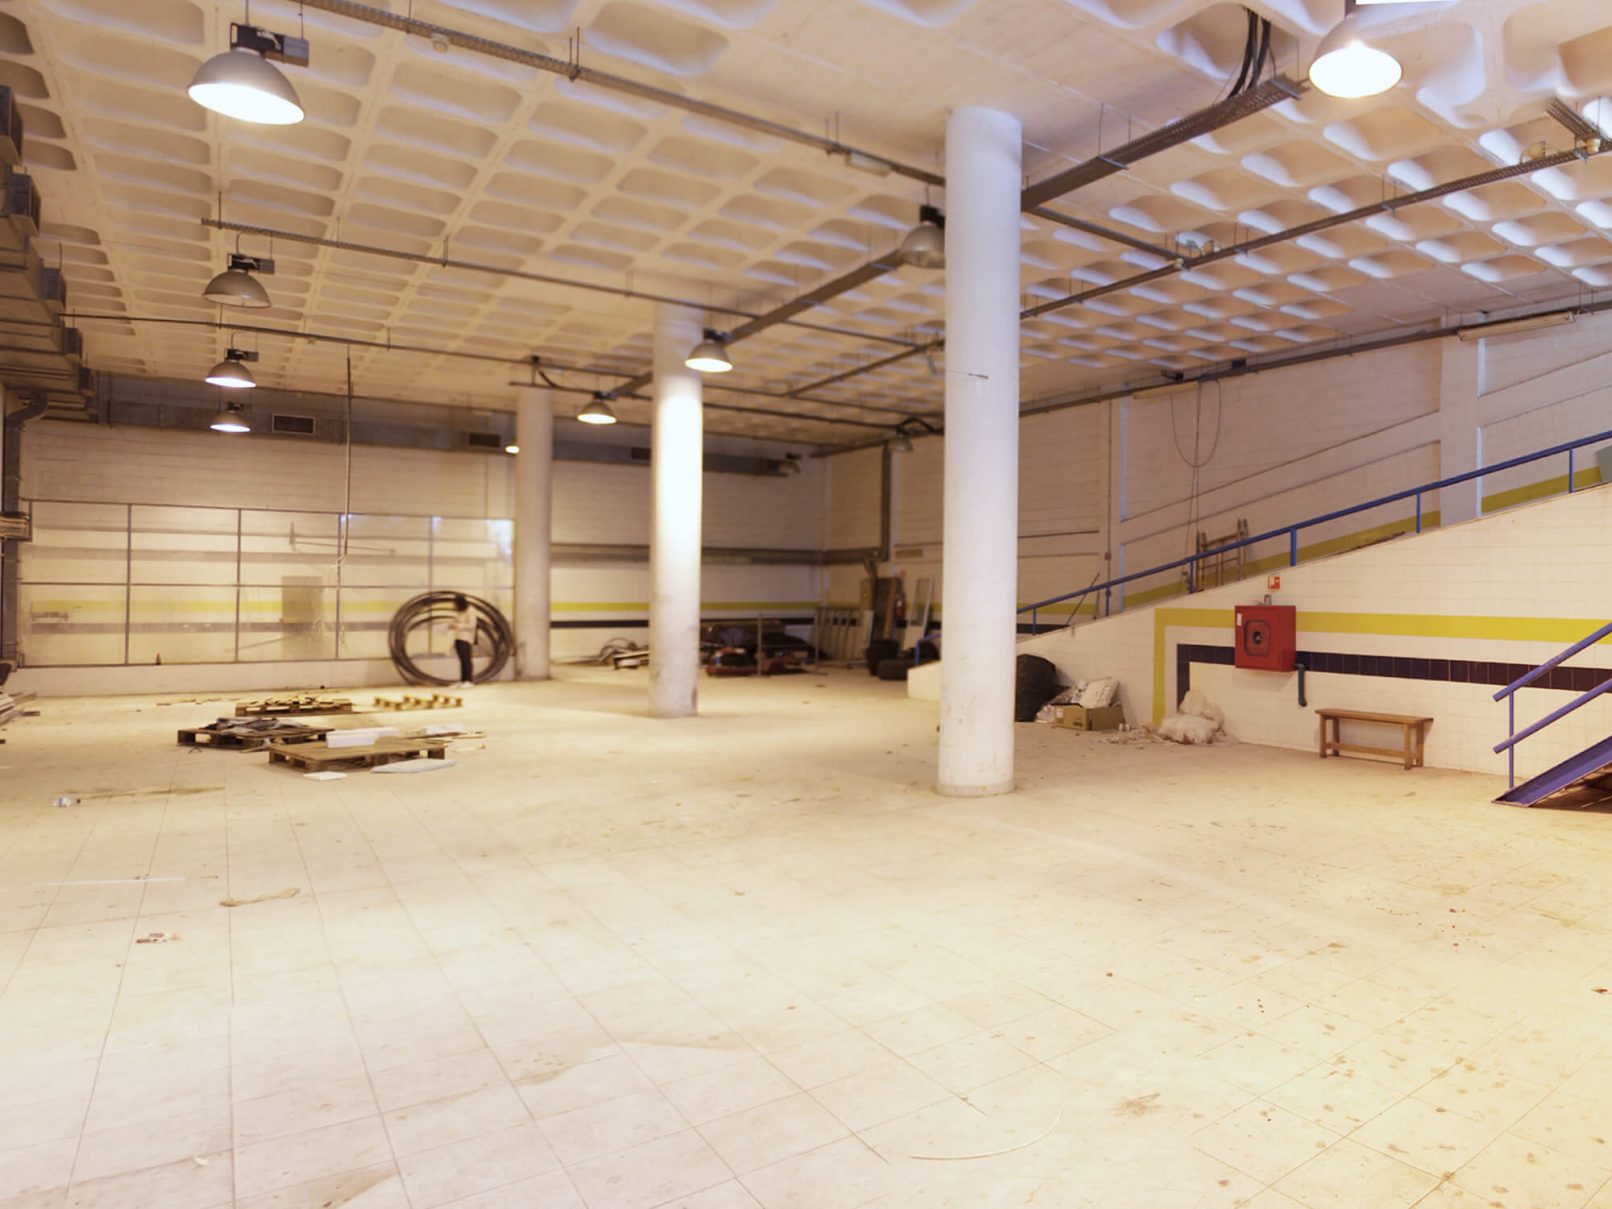 Photo of the space before its conversion into a crossfit box.